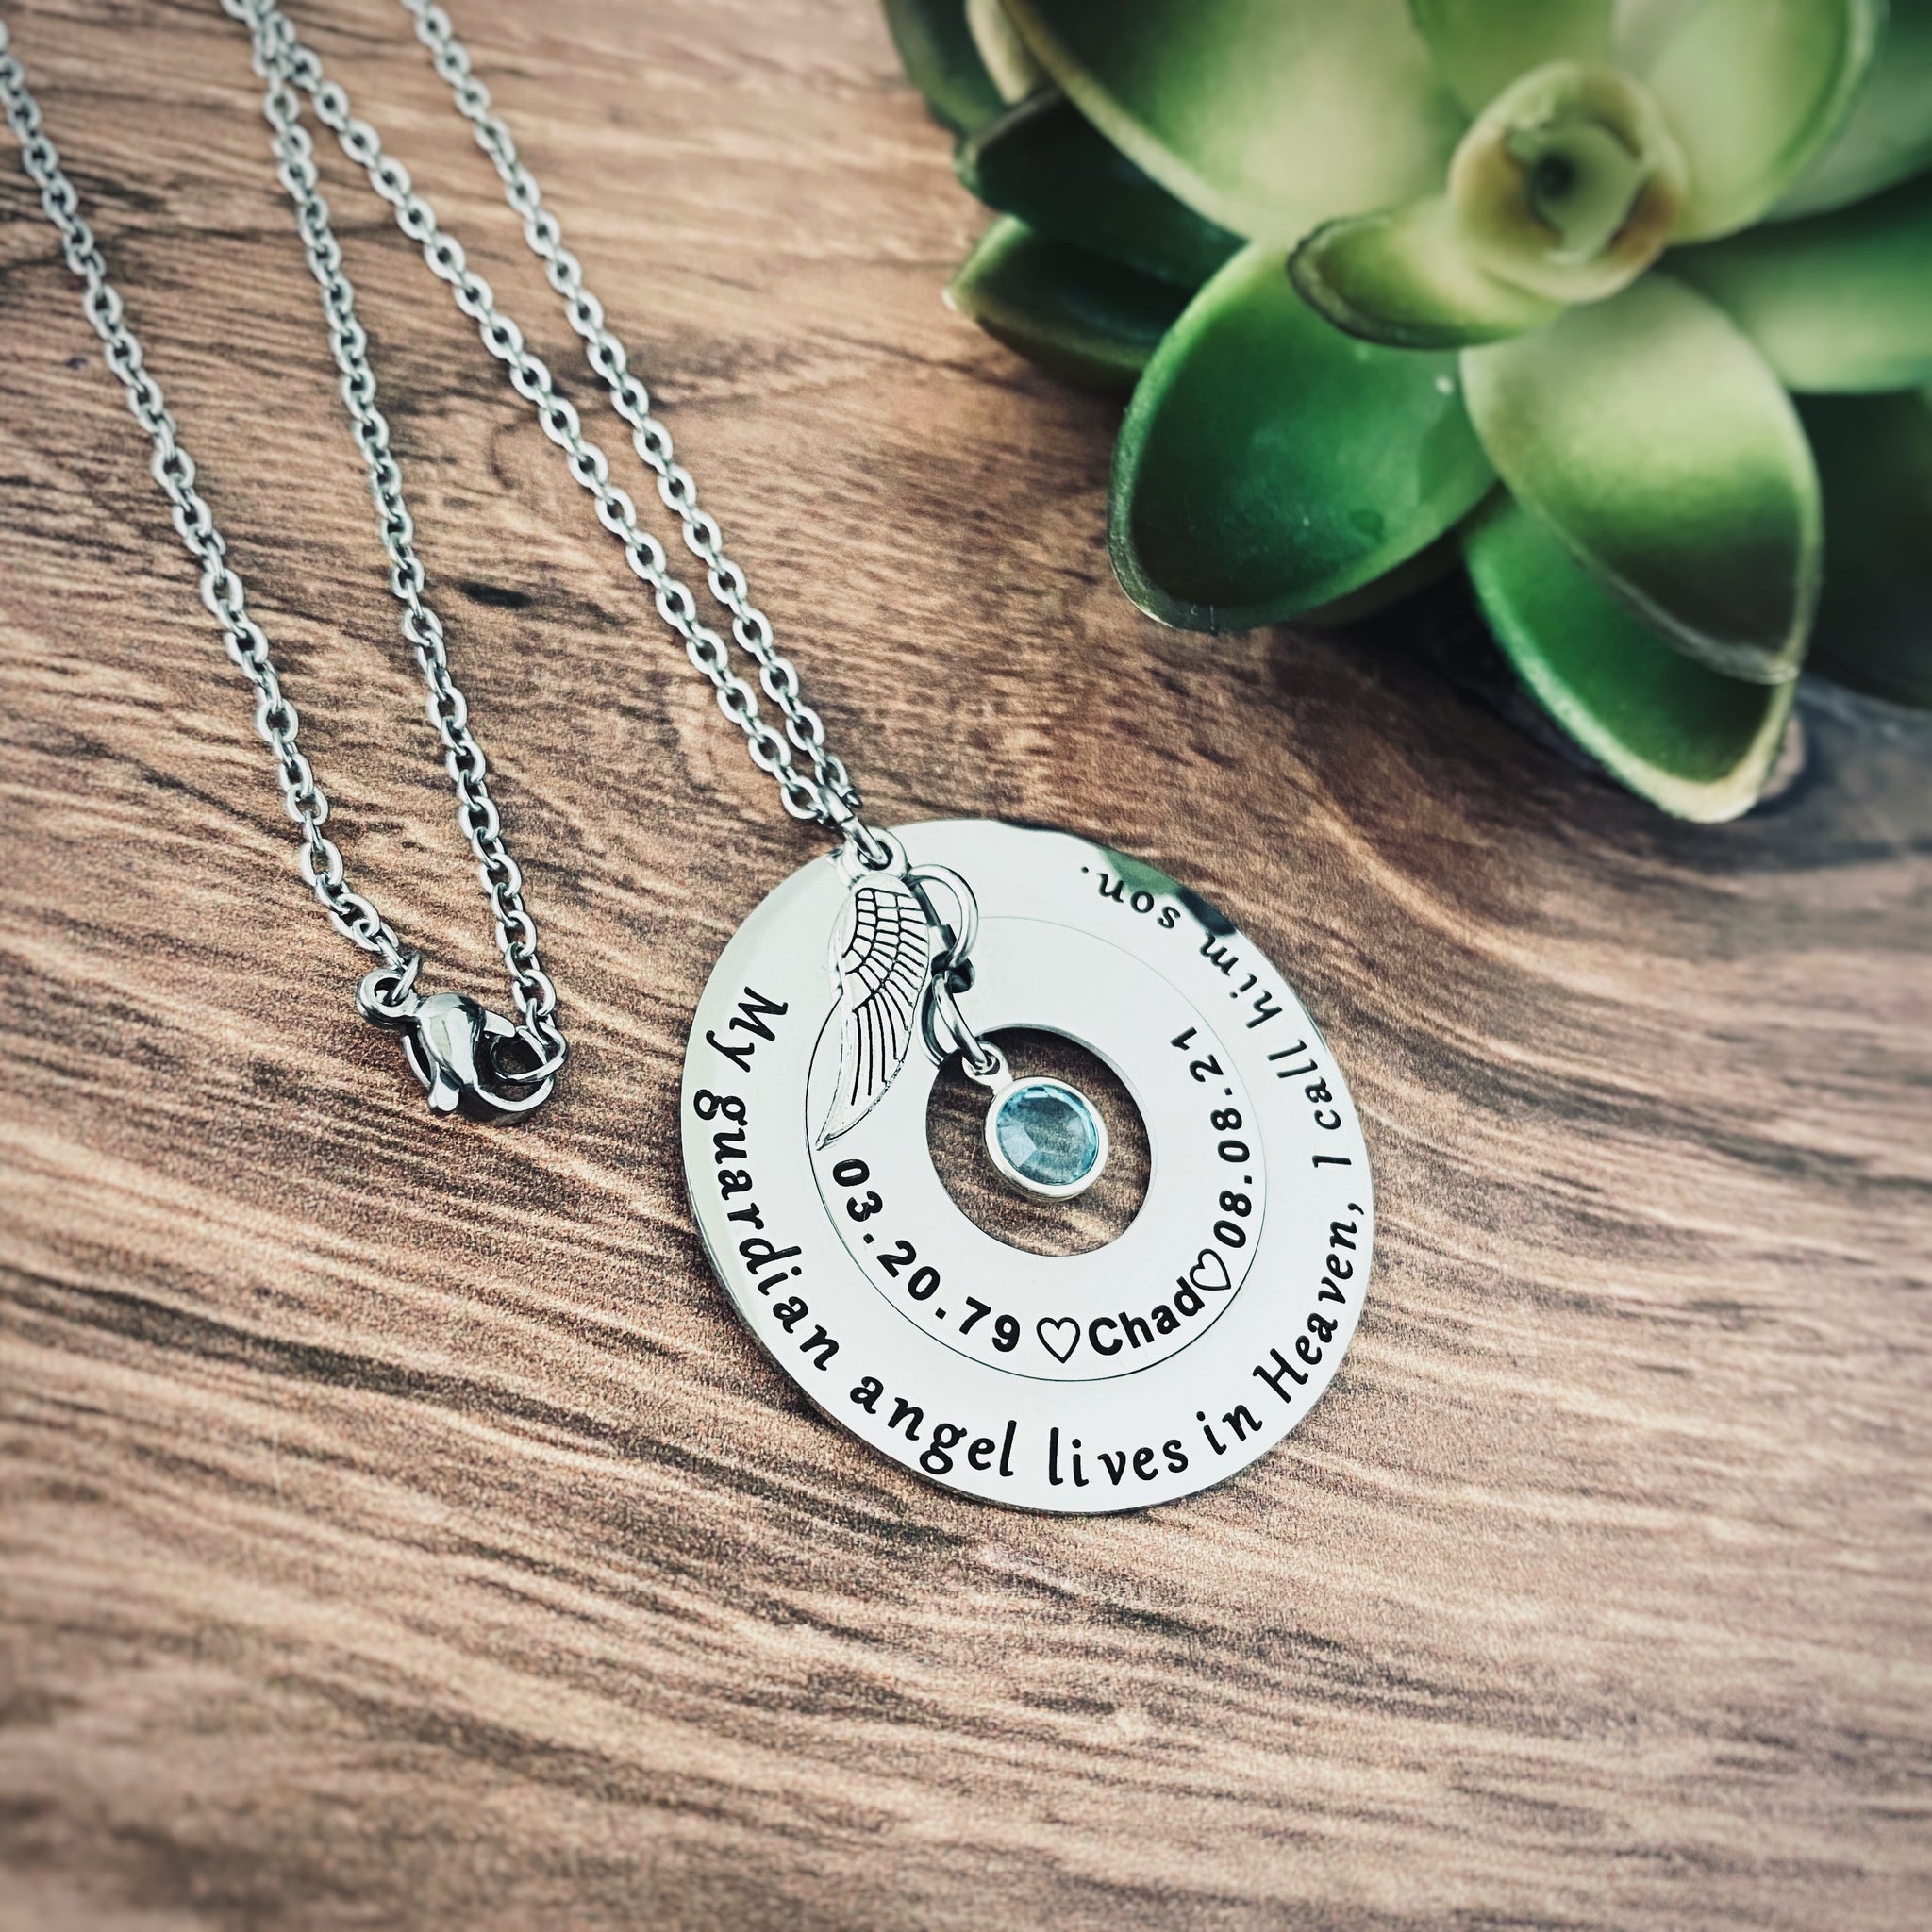 Memorial Keepsake Jewelry To Keep a Loved One's Memory Close